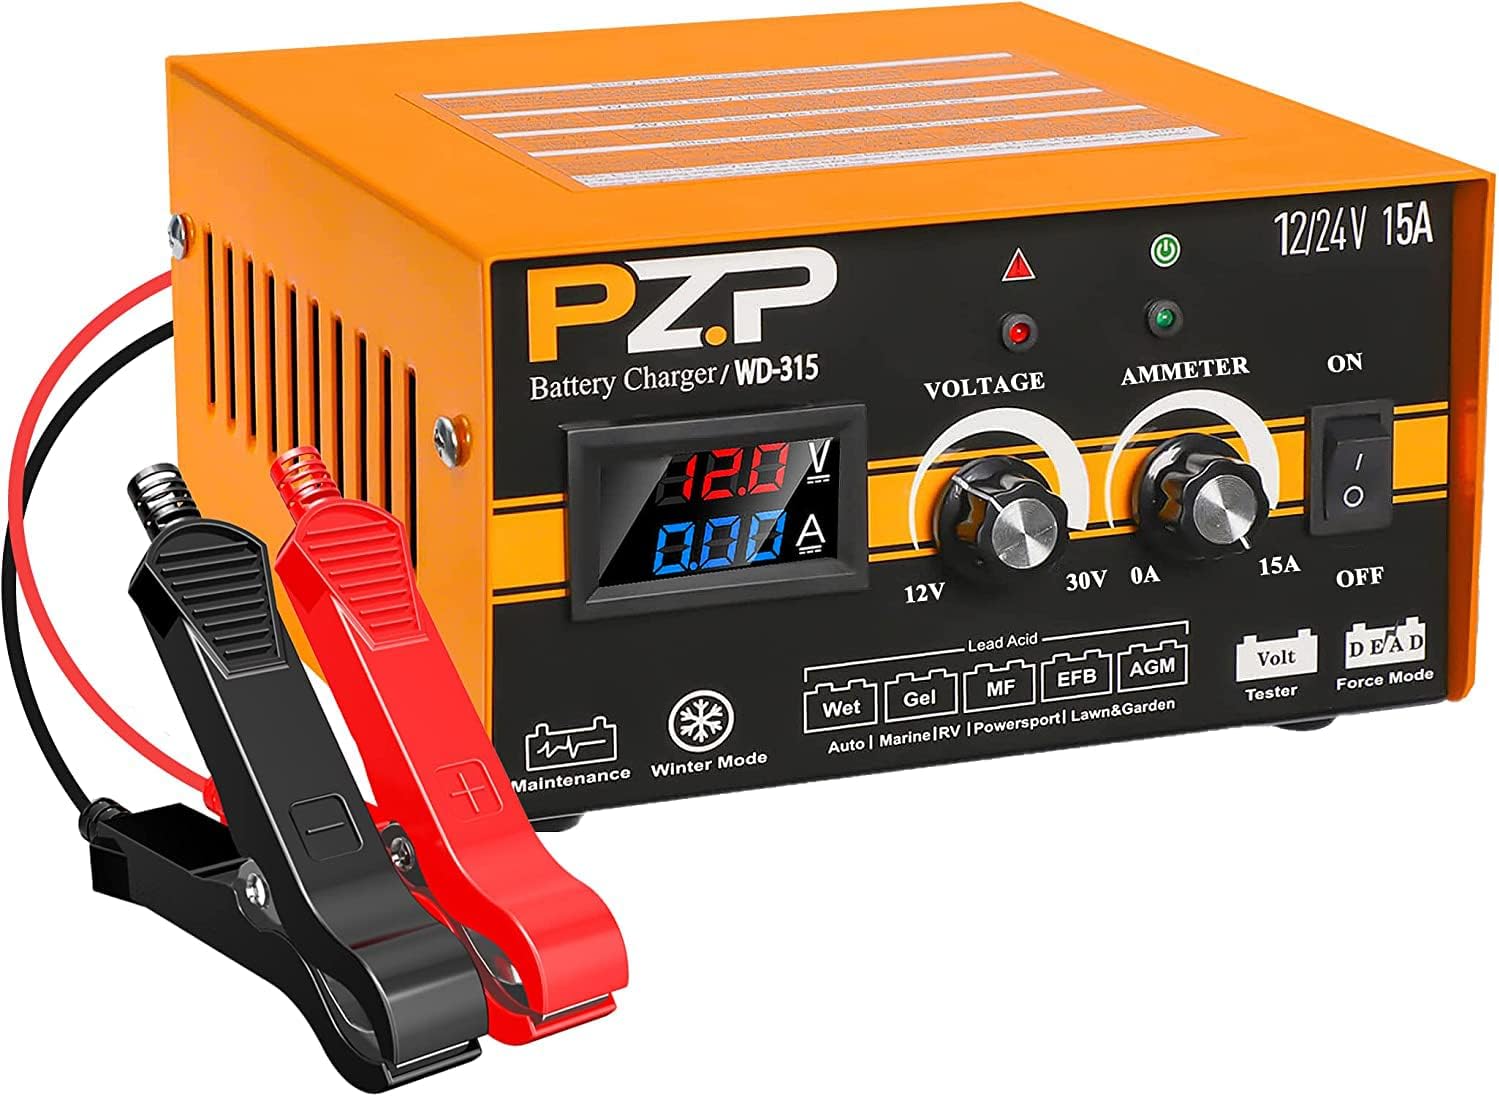 PZP 0-15A Car Battery Charger Review